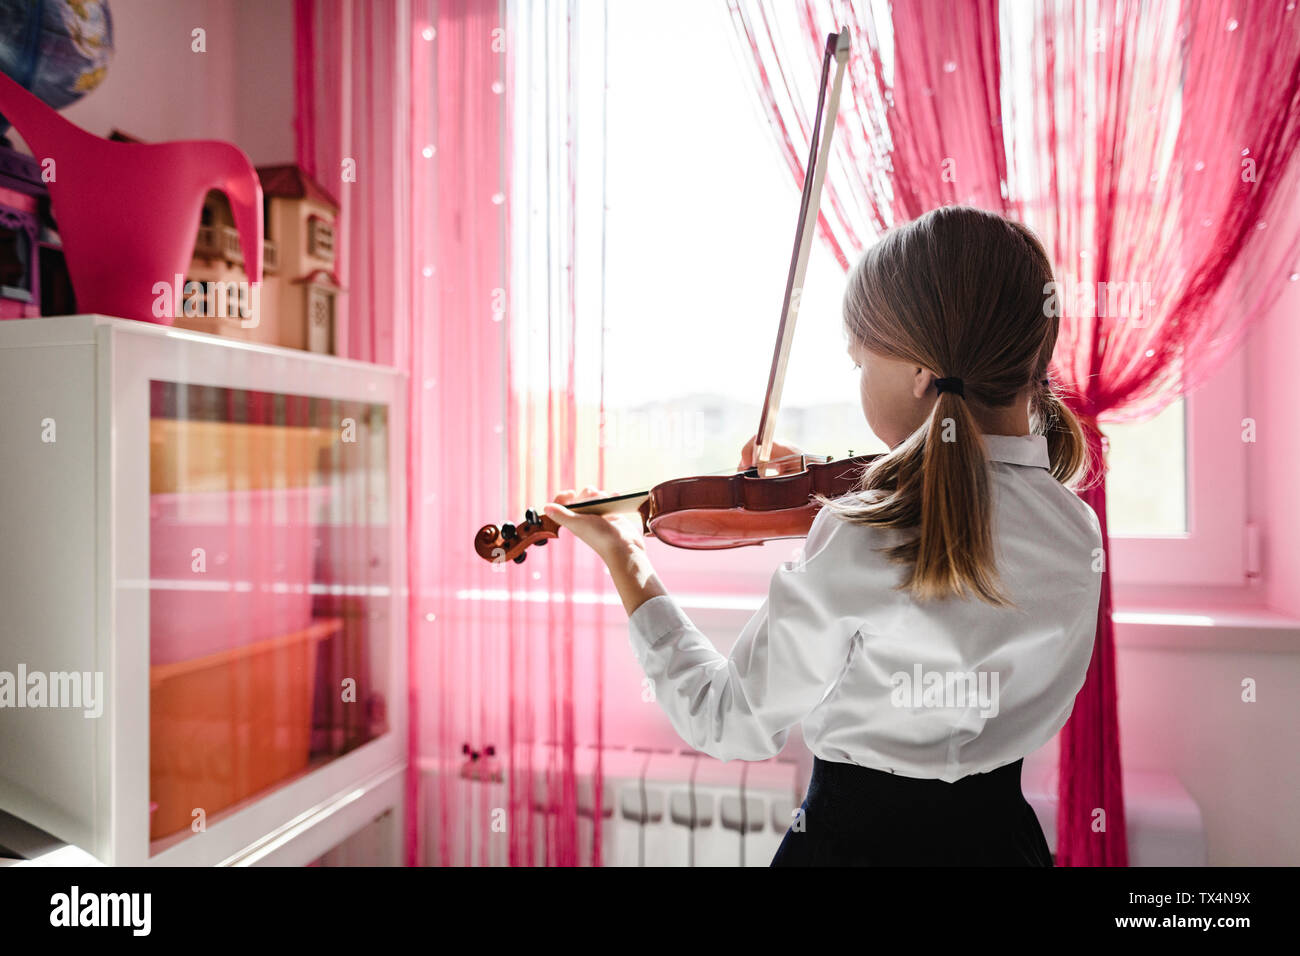 Girl playing violin at the window at home Stock Photo